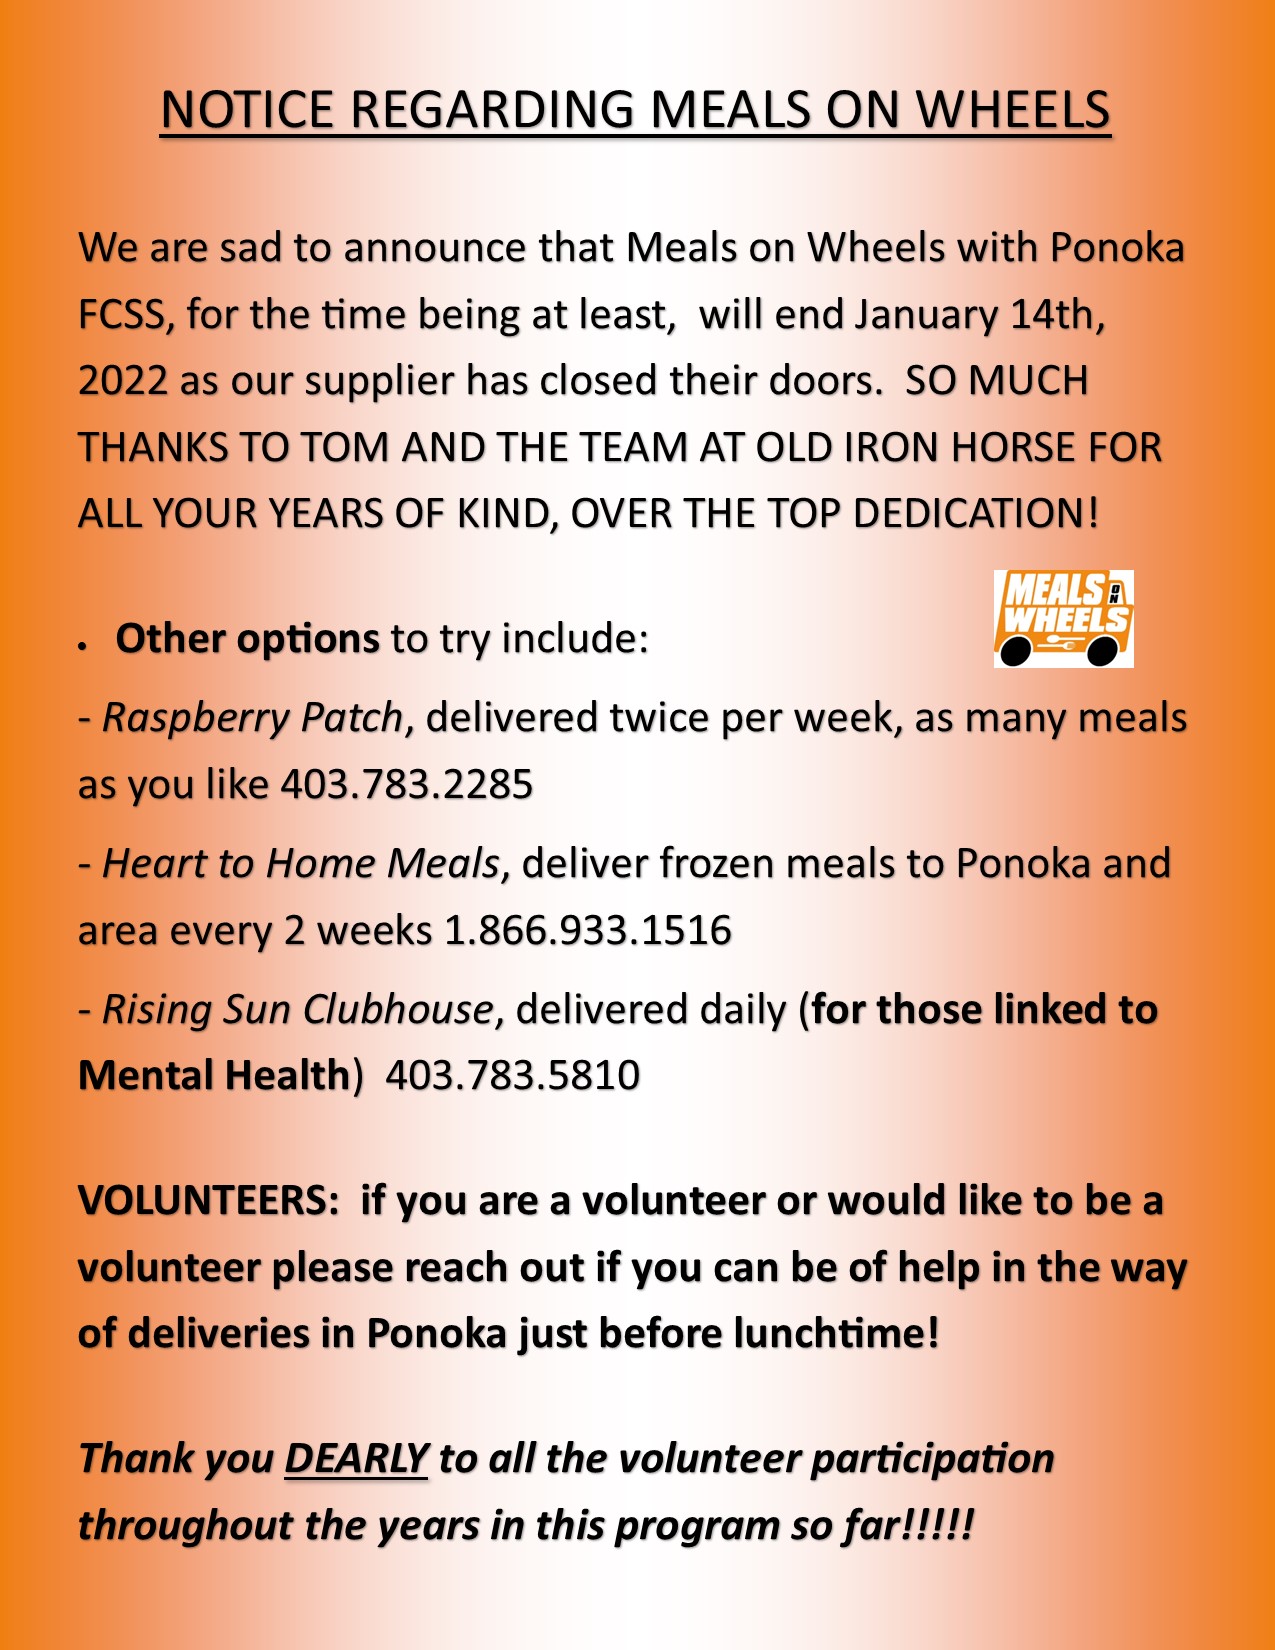 Changes to Meals on Wheels effective January 14, 2022. Call FCSS Office at 403-783-4462 for information.